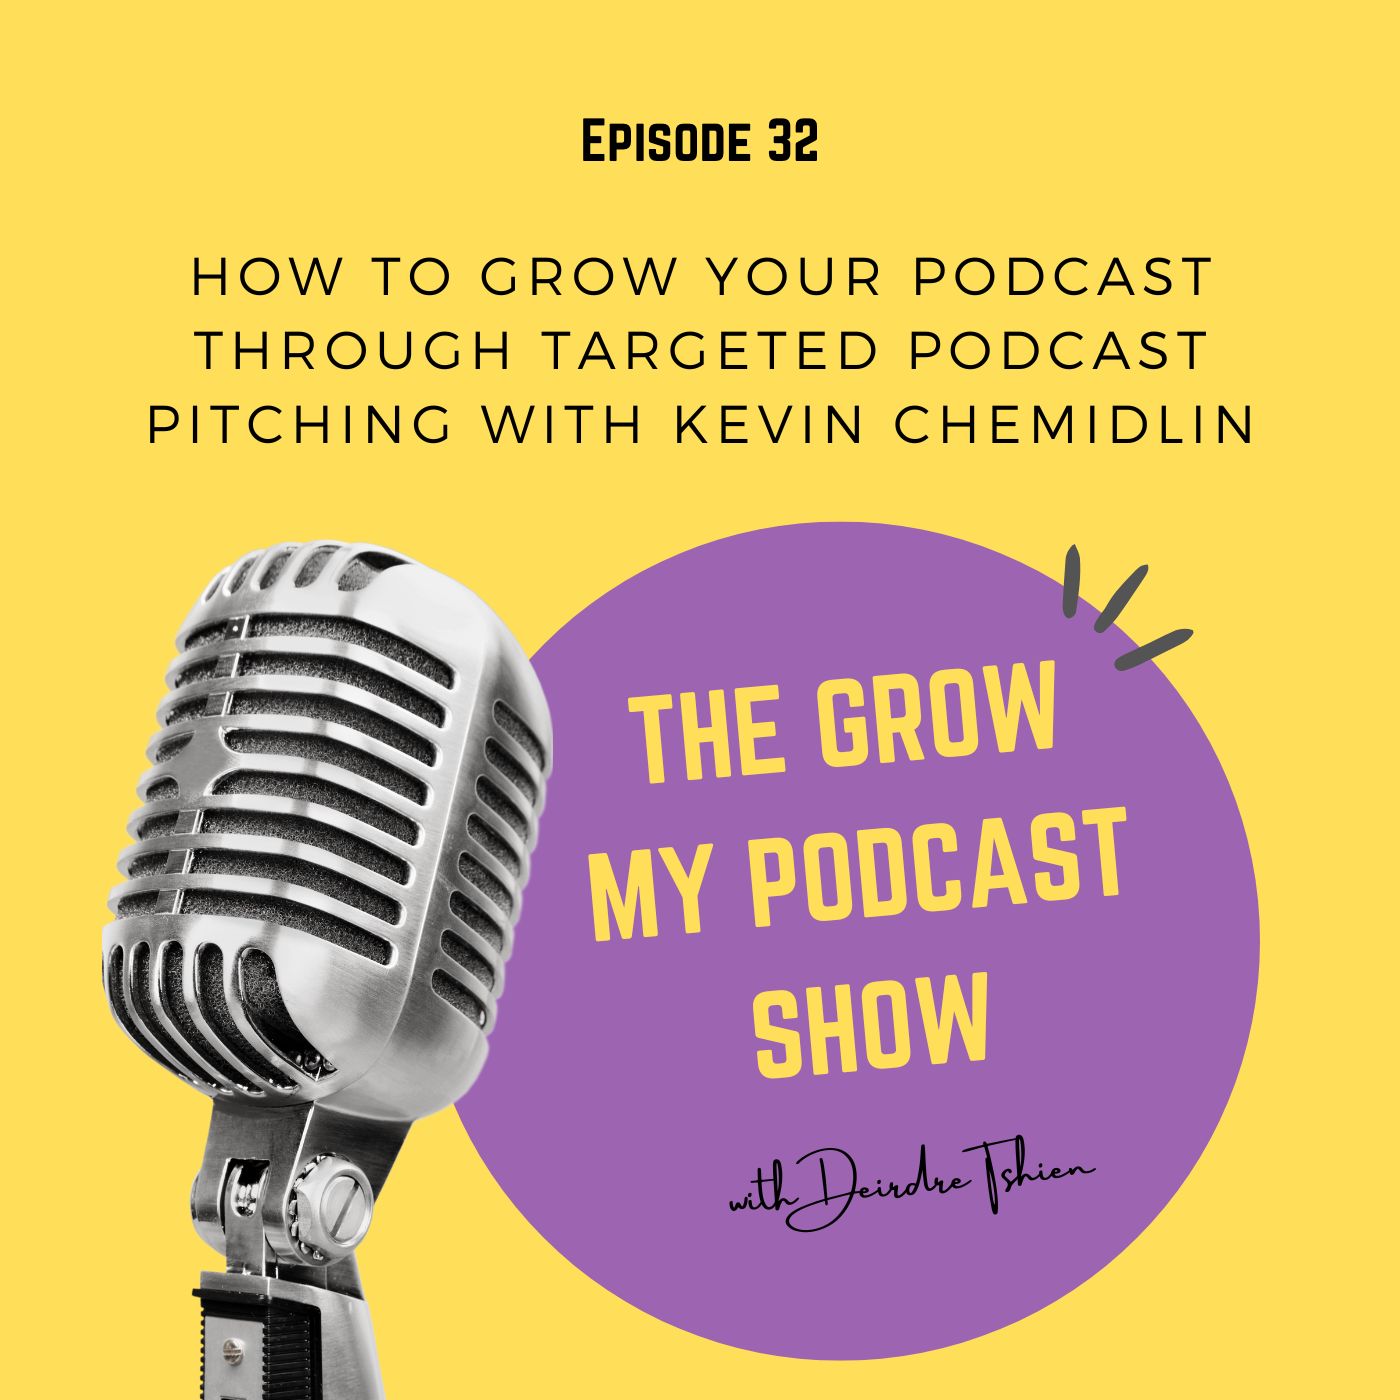 Episode image for 32. How to Grow Your Podcast Through Targeted Podcast Pitching with Kevin Chemidlin